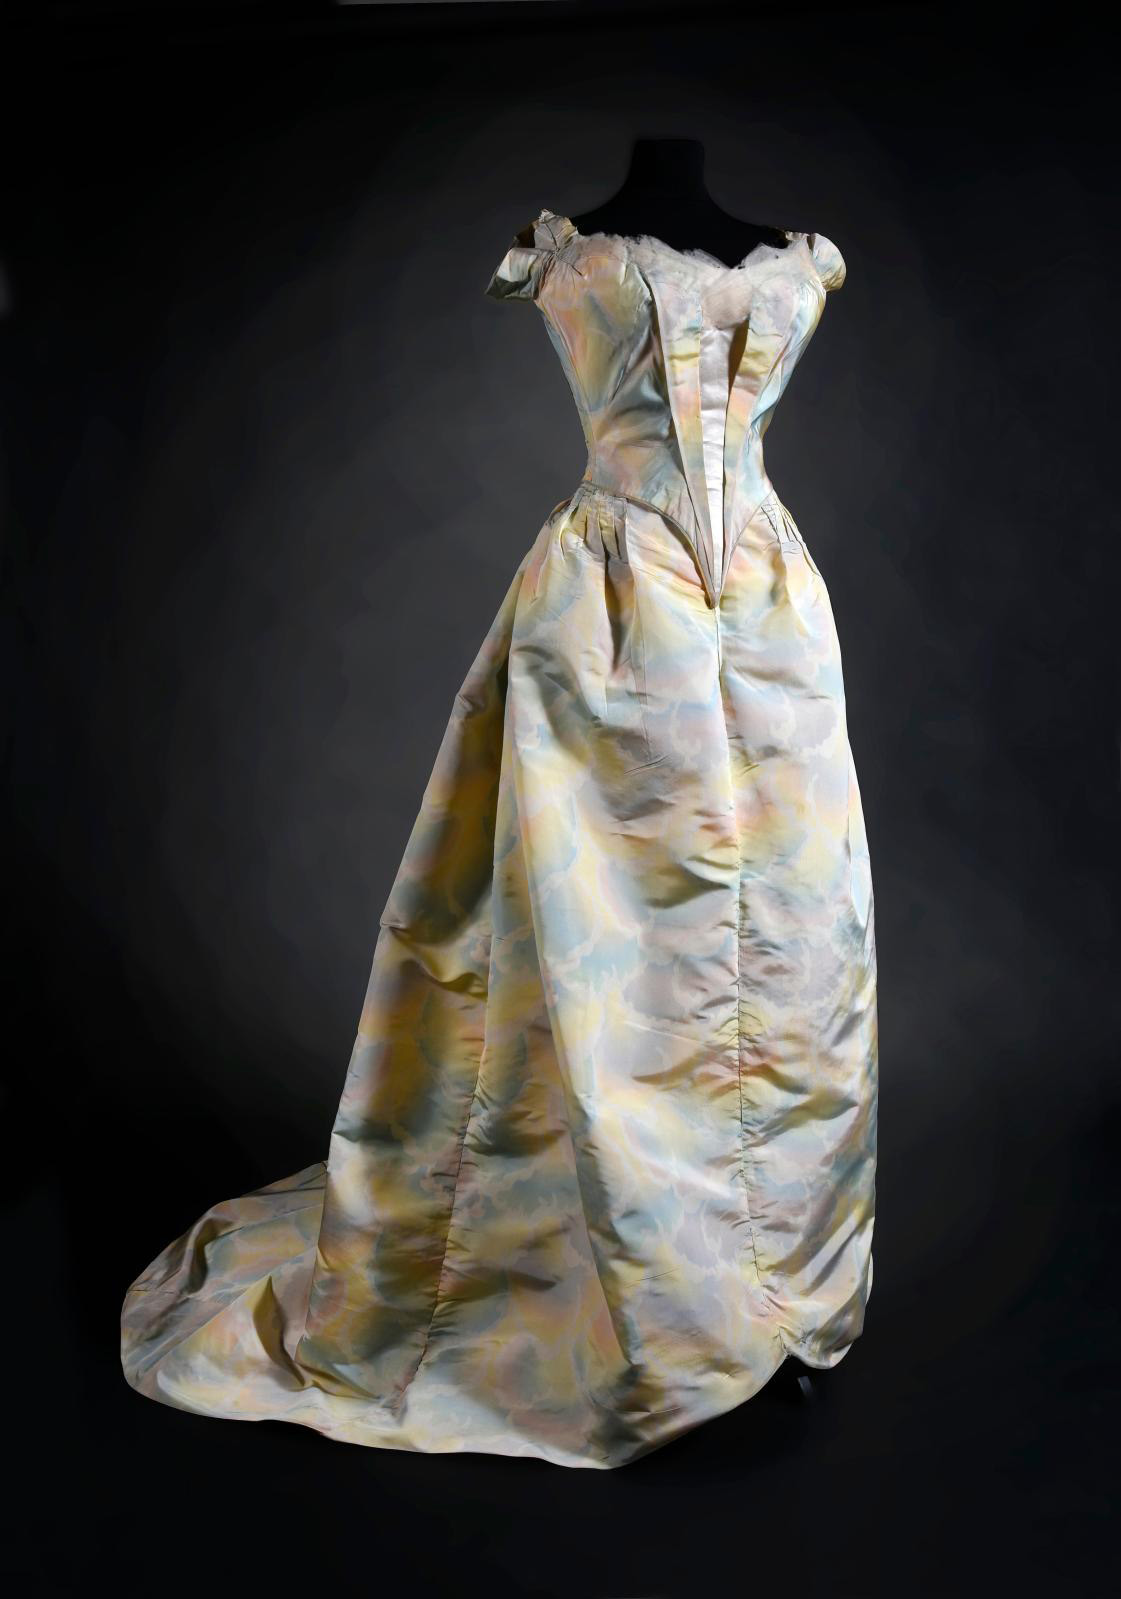 Ball gown by Worth, c. 1900, cream silk faille warp-print dress with iridescent rainbow cloud pattern, boned pointed bodice laced at the b